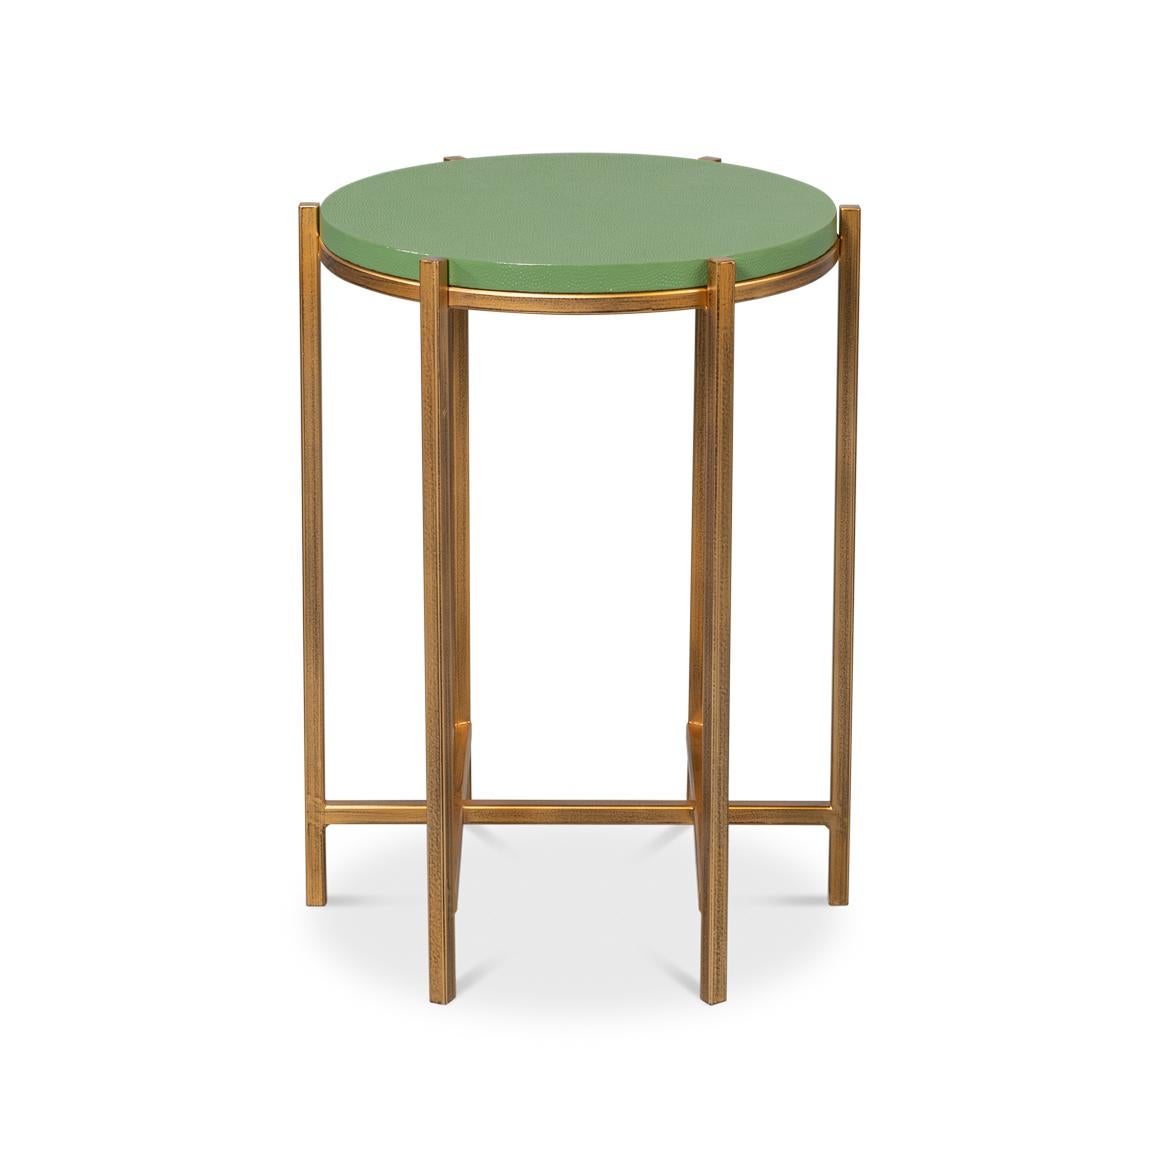 Leather Top Accent Table, where contemporary design meets sophisticated luxury. The table features a stunning watercress green leather-wrapped shagreen embossed round top in a vibrant green hue, creating a sleek and stylish surface.

Supported by a